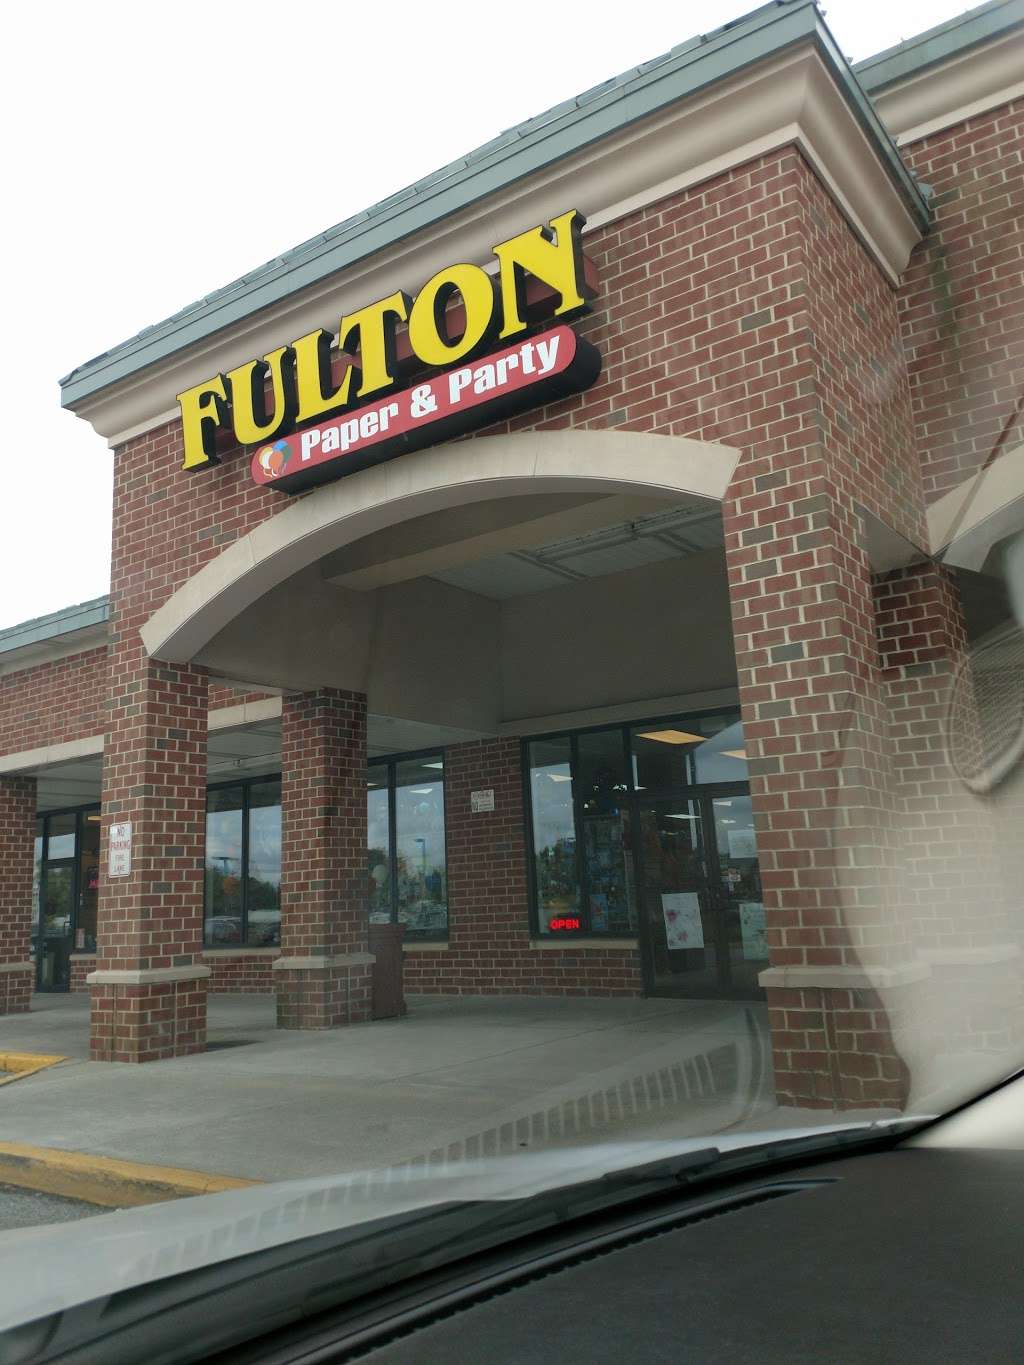 Fulton Paper & Party Supplies | Photo 2 of 3 | Address: 438 E Main St, Middletown, DE 19709, USA | Phone: (302) 449-2100